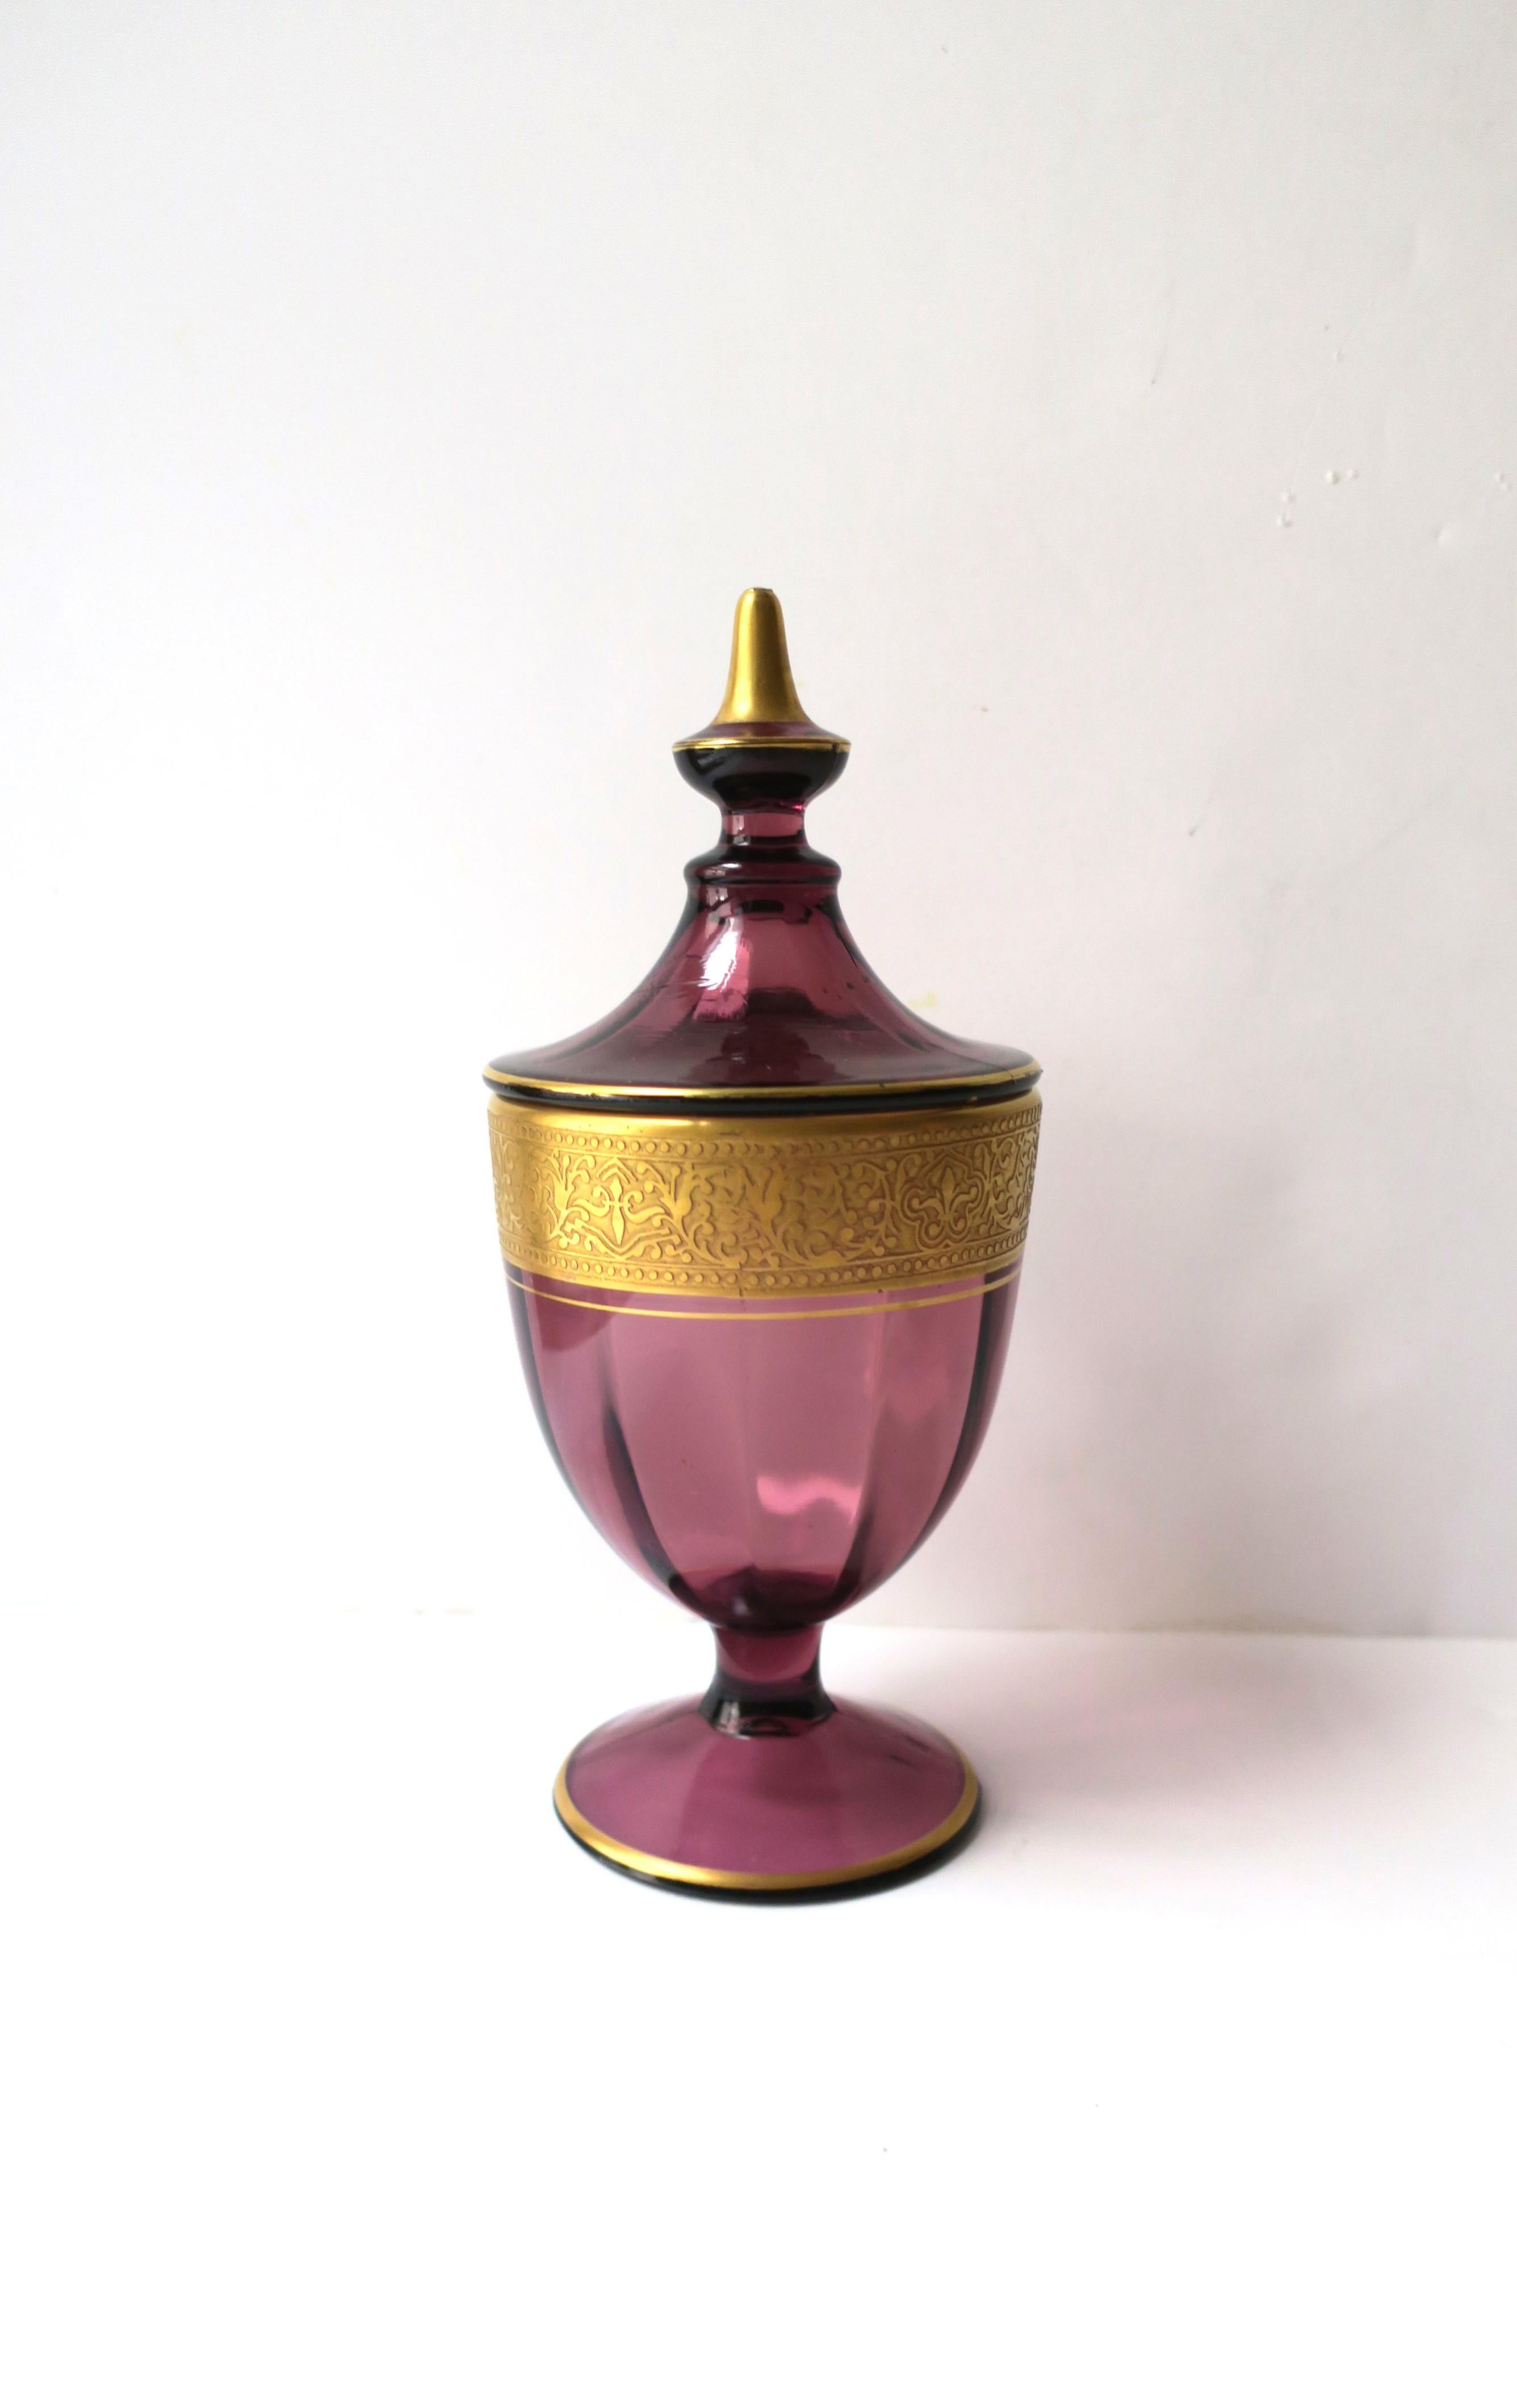 A beautiful amethyst purple glass urn box with gold gilded frieze, circa mid-20th century, Europe. Piece is amethyst glass with a gold gilded frieze, thin gold band below, thin gold band around base, and lid with gold tip and thin gold band around